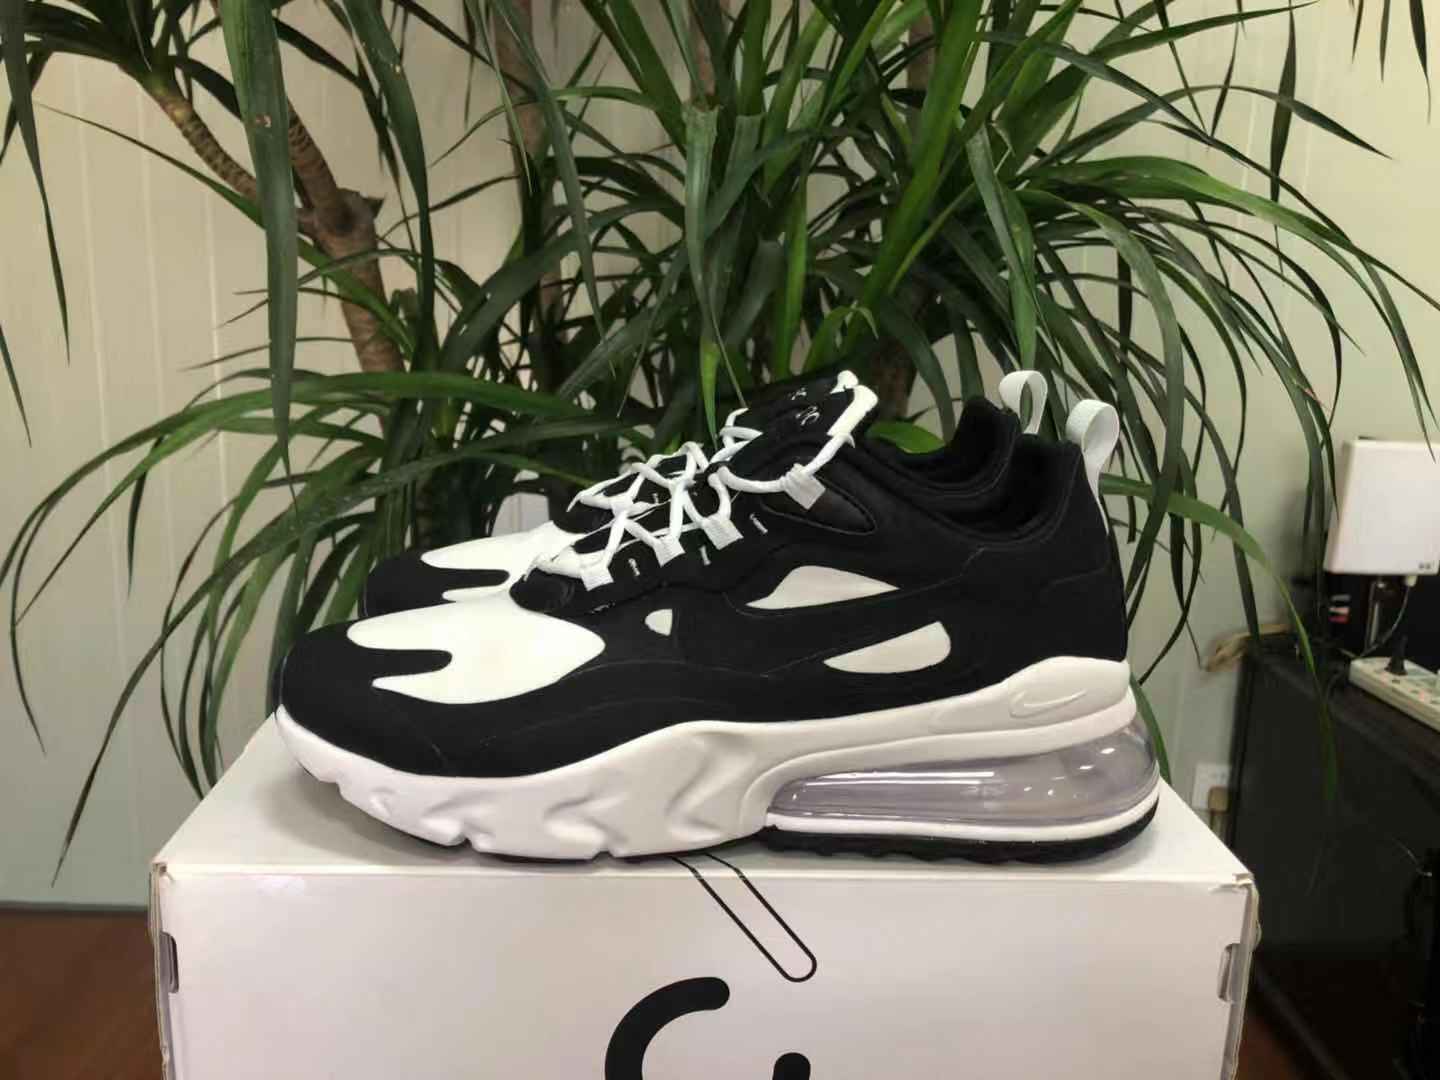 Men's Hot sale Running weapon Nike Air Max Shoes 055